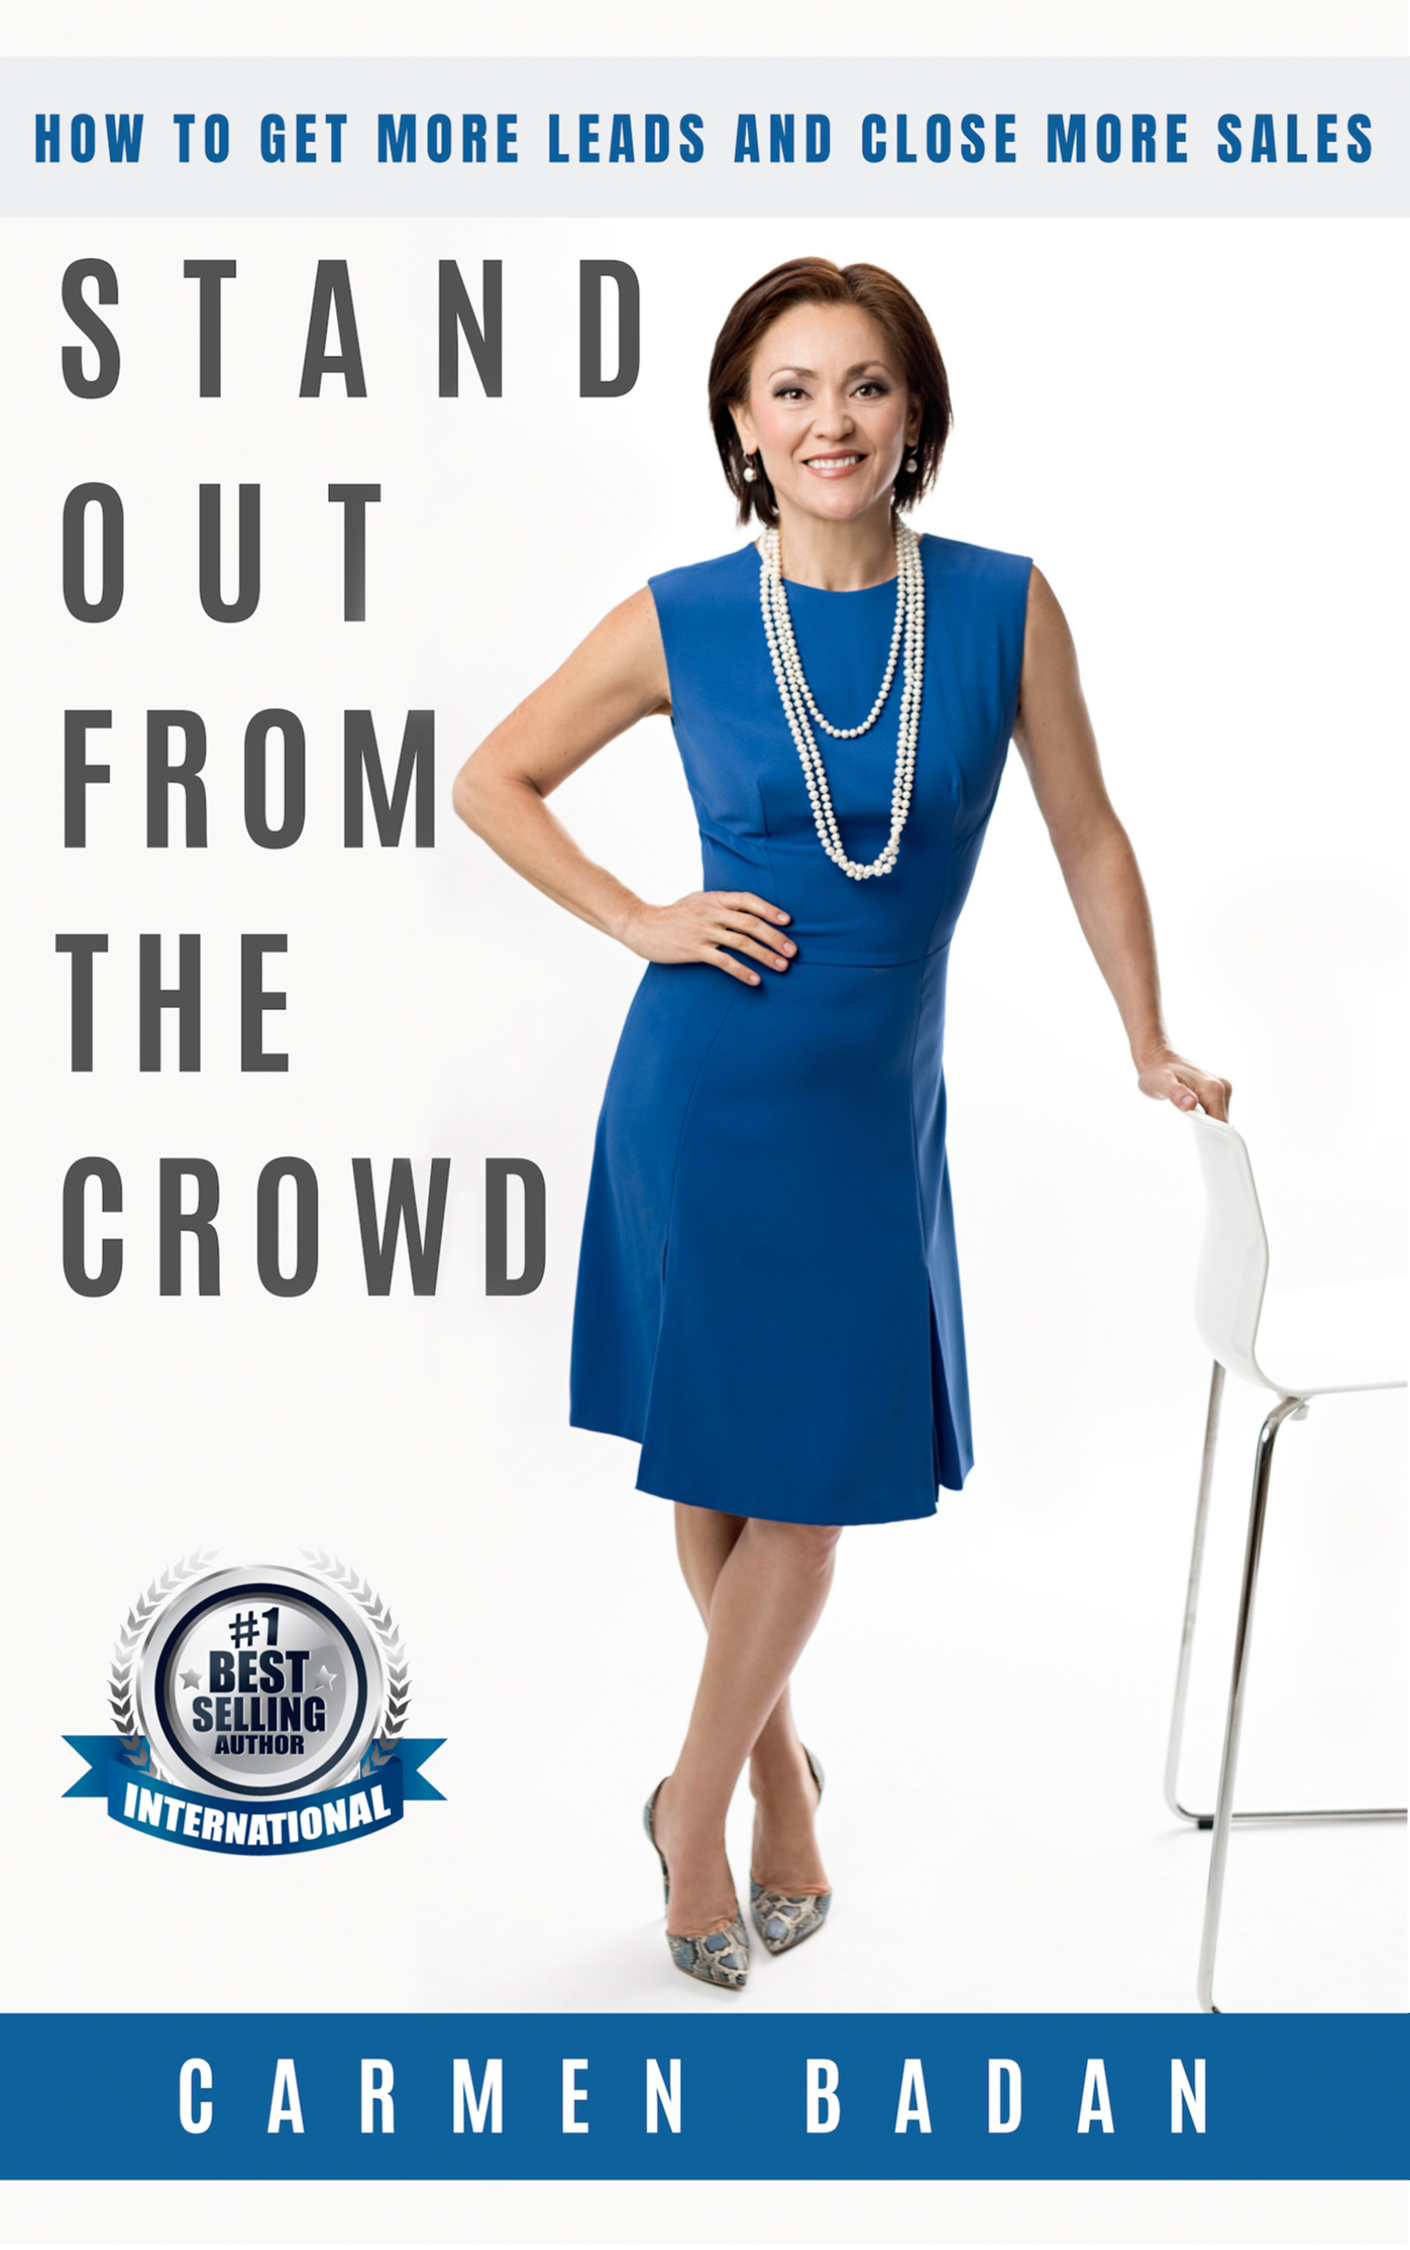 Carmen Badan is standing in a blue fitted business dress with one hand resting on a white chair. Next to her in big bold letters is the title STAND OUT FROM THE CROWD. Above her, in a light gray rectangle, are the words HOW TO GET MORE LEADS AND CLOSE MORE SALES. At the bottom in a blue rectangle is CARMEN BADAN. Just above the rectangle, close to Carmen's feet is a logo that says #1 Best Selling Author International